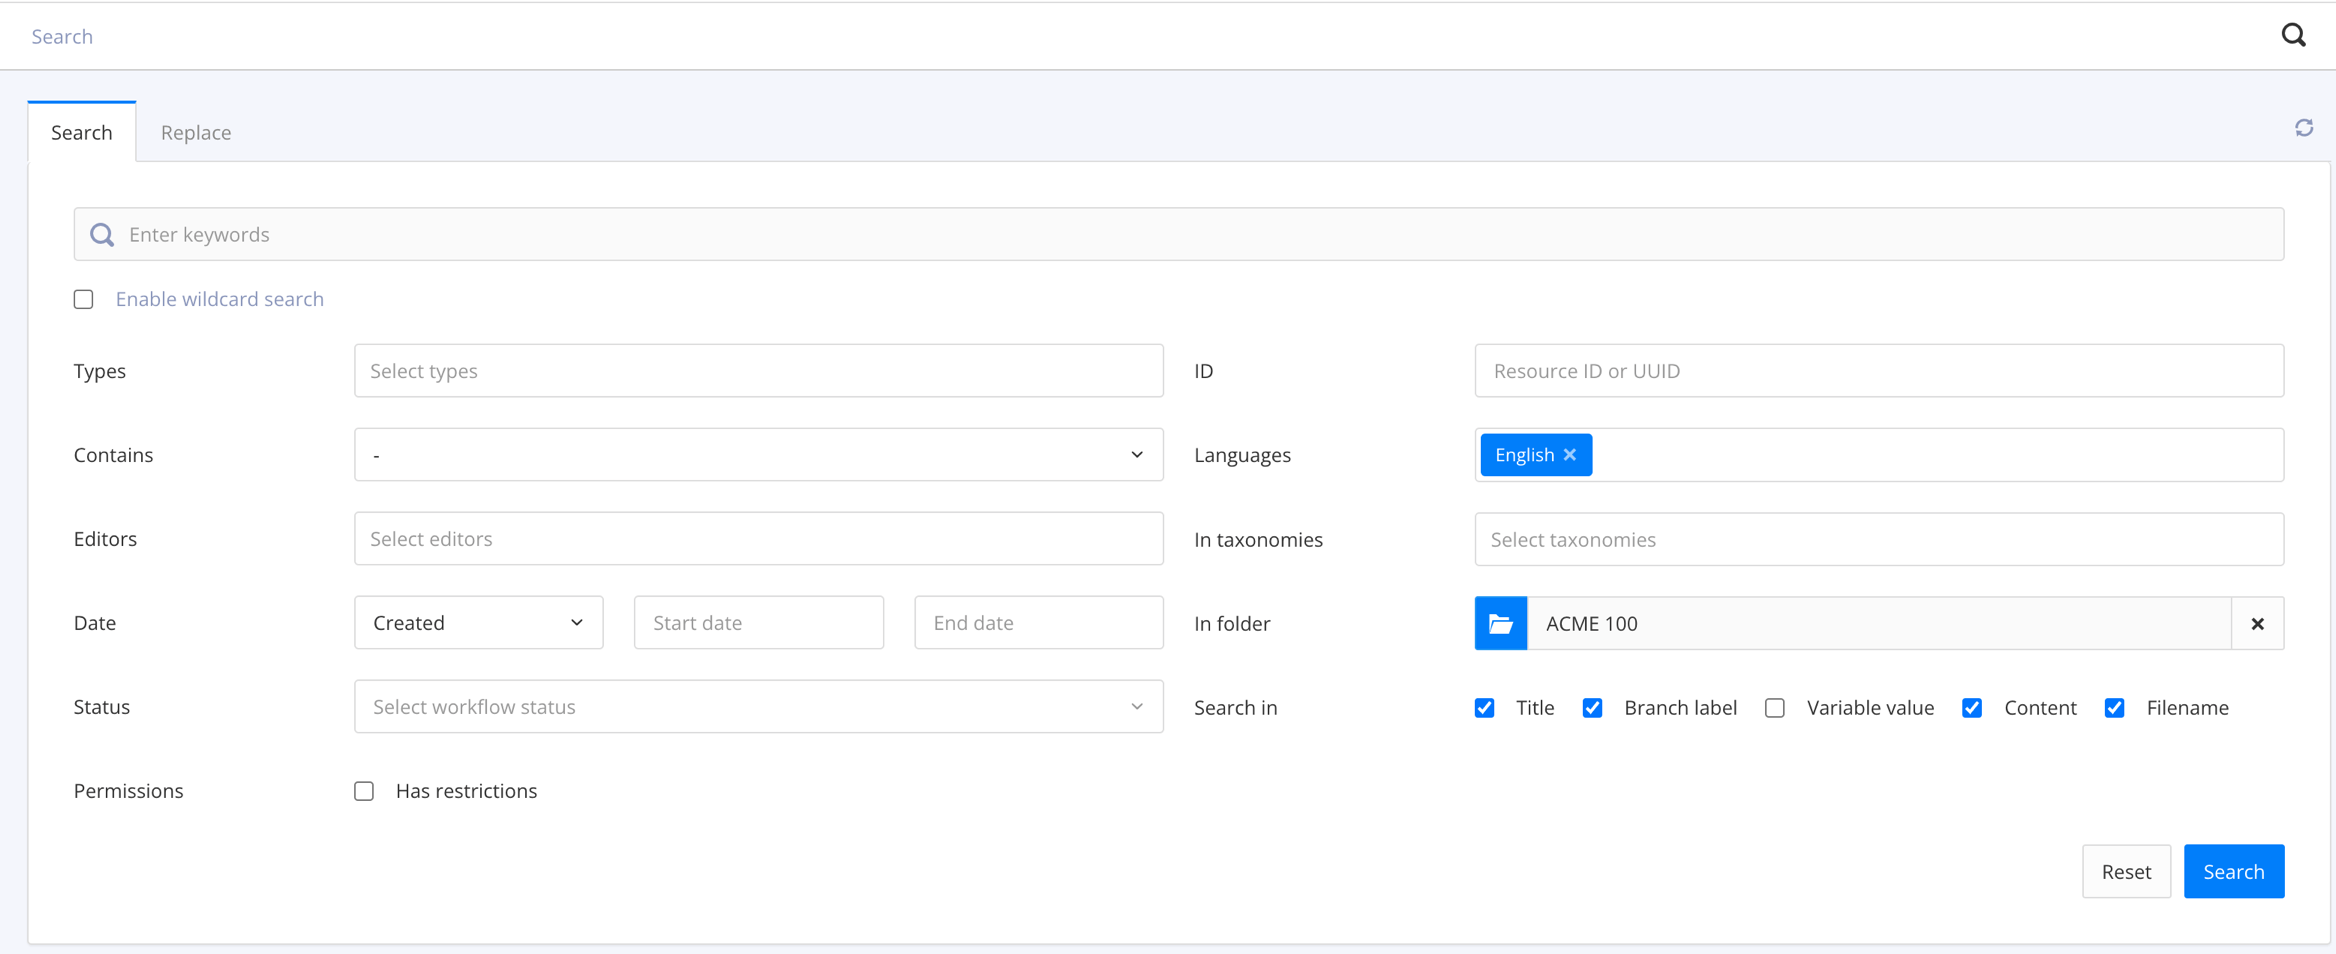 Advanced Search settings. In this image, the settings are already configured to filter the search so that it only looks for results in a specific folder.